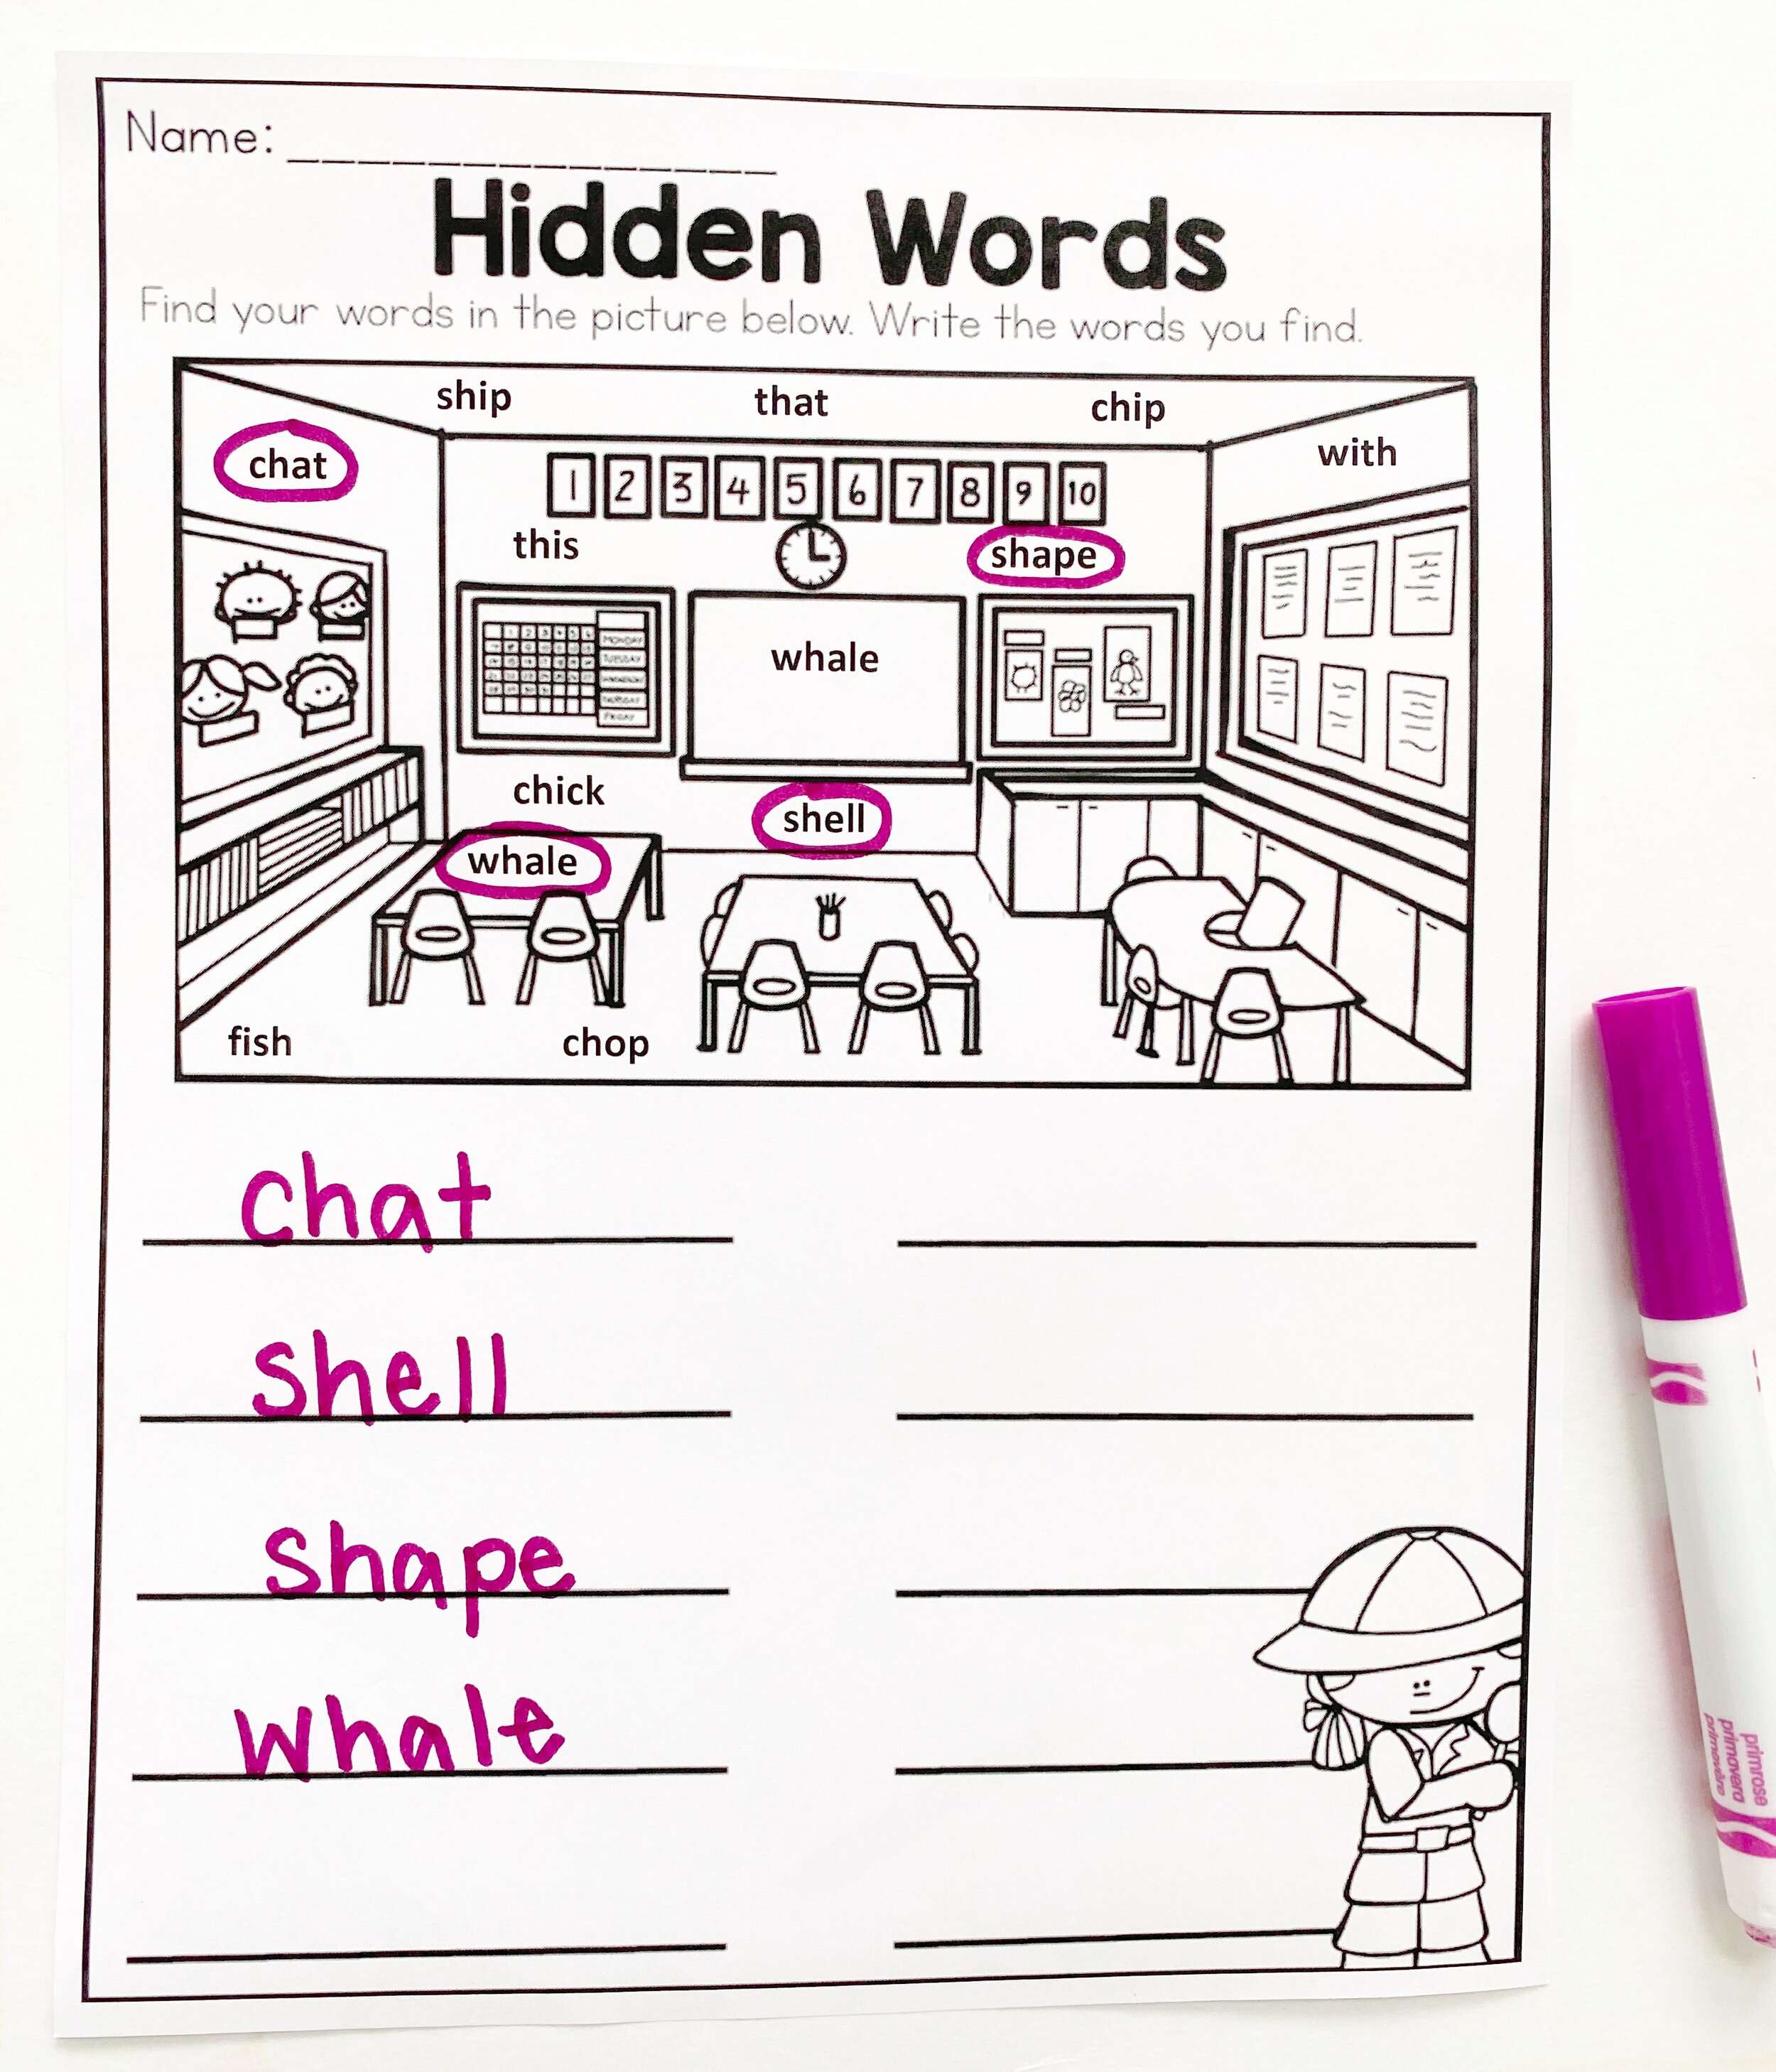 Hidden Words is a simple and engaging word work activity!